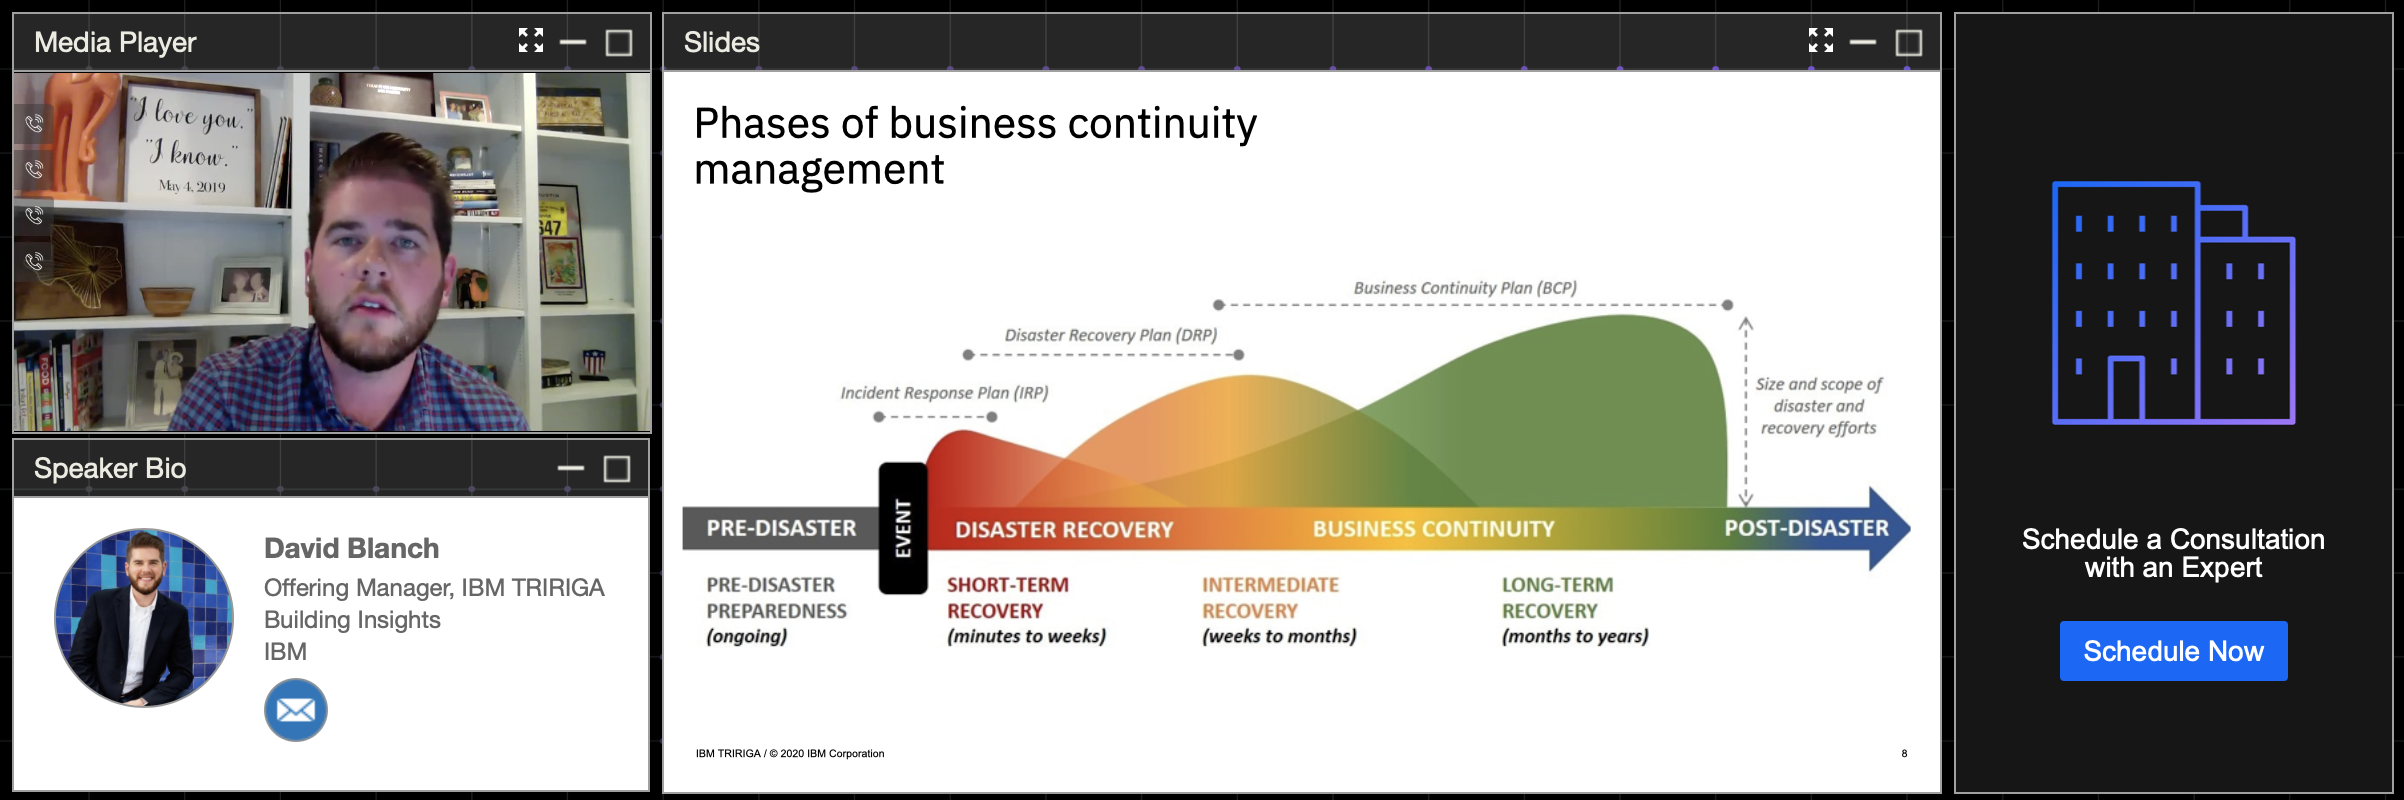 Screenshot of David Blanch giving an online presentation about business continuity management